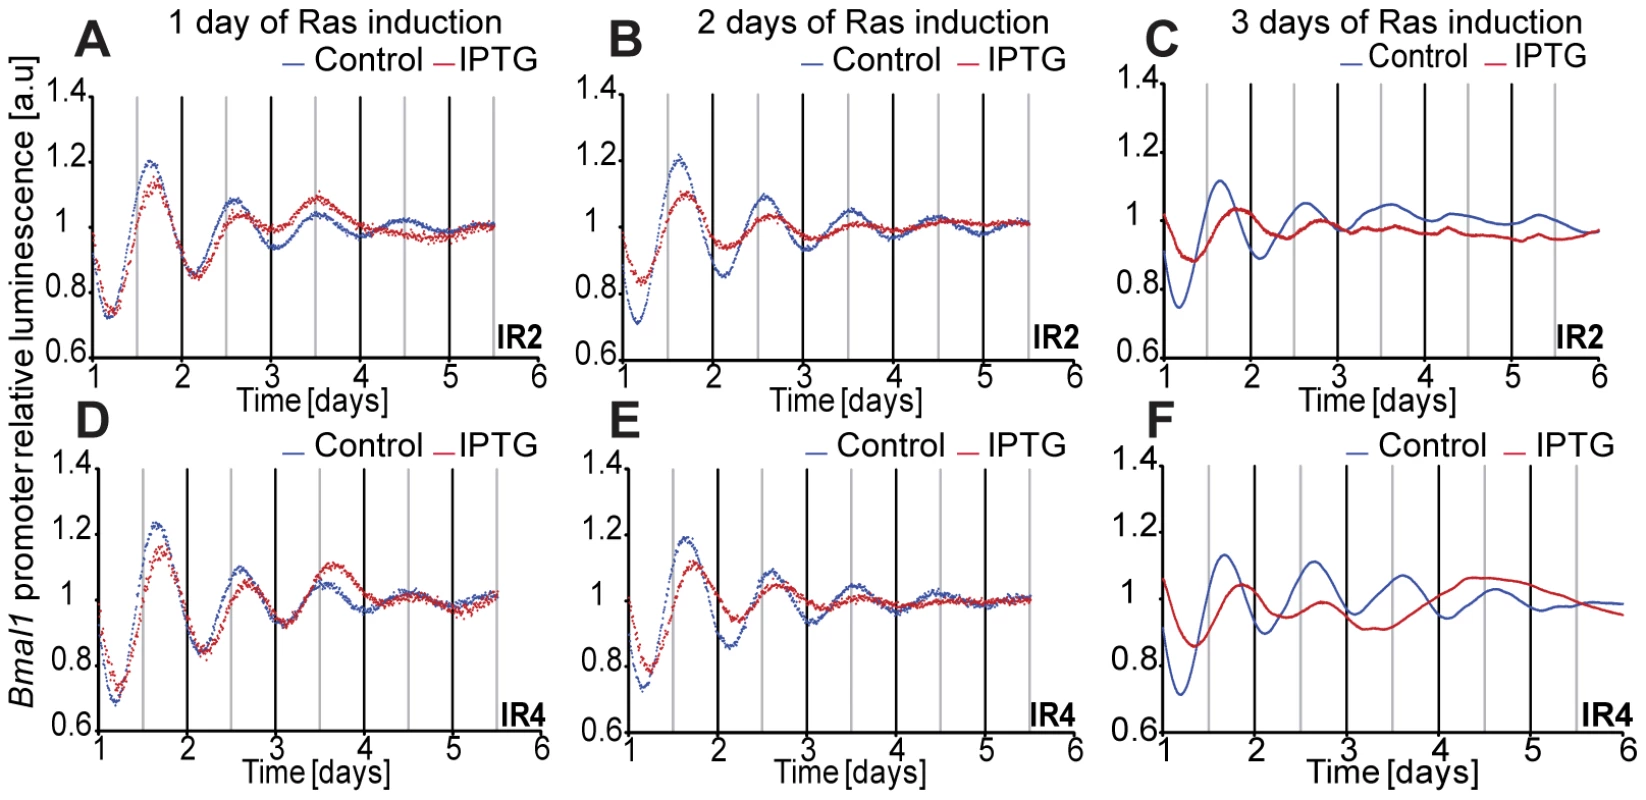 Induction of Ras expression in rat fibroblasts.